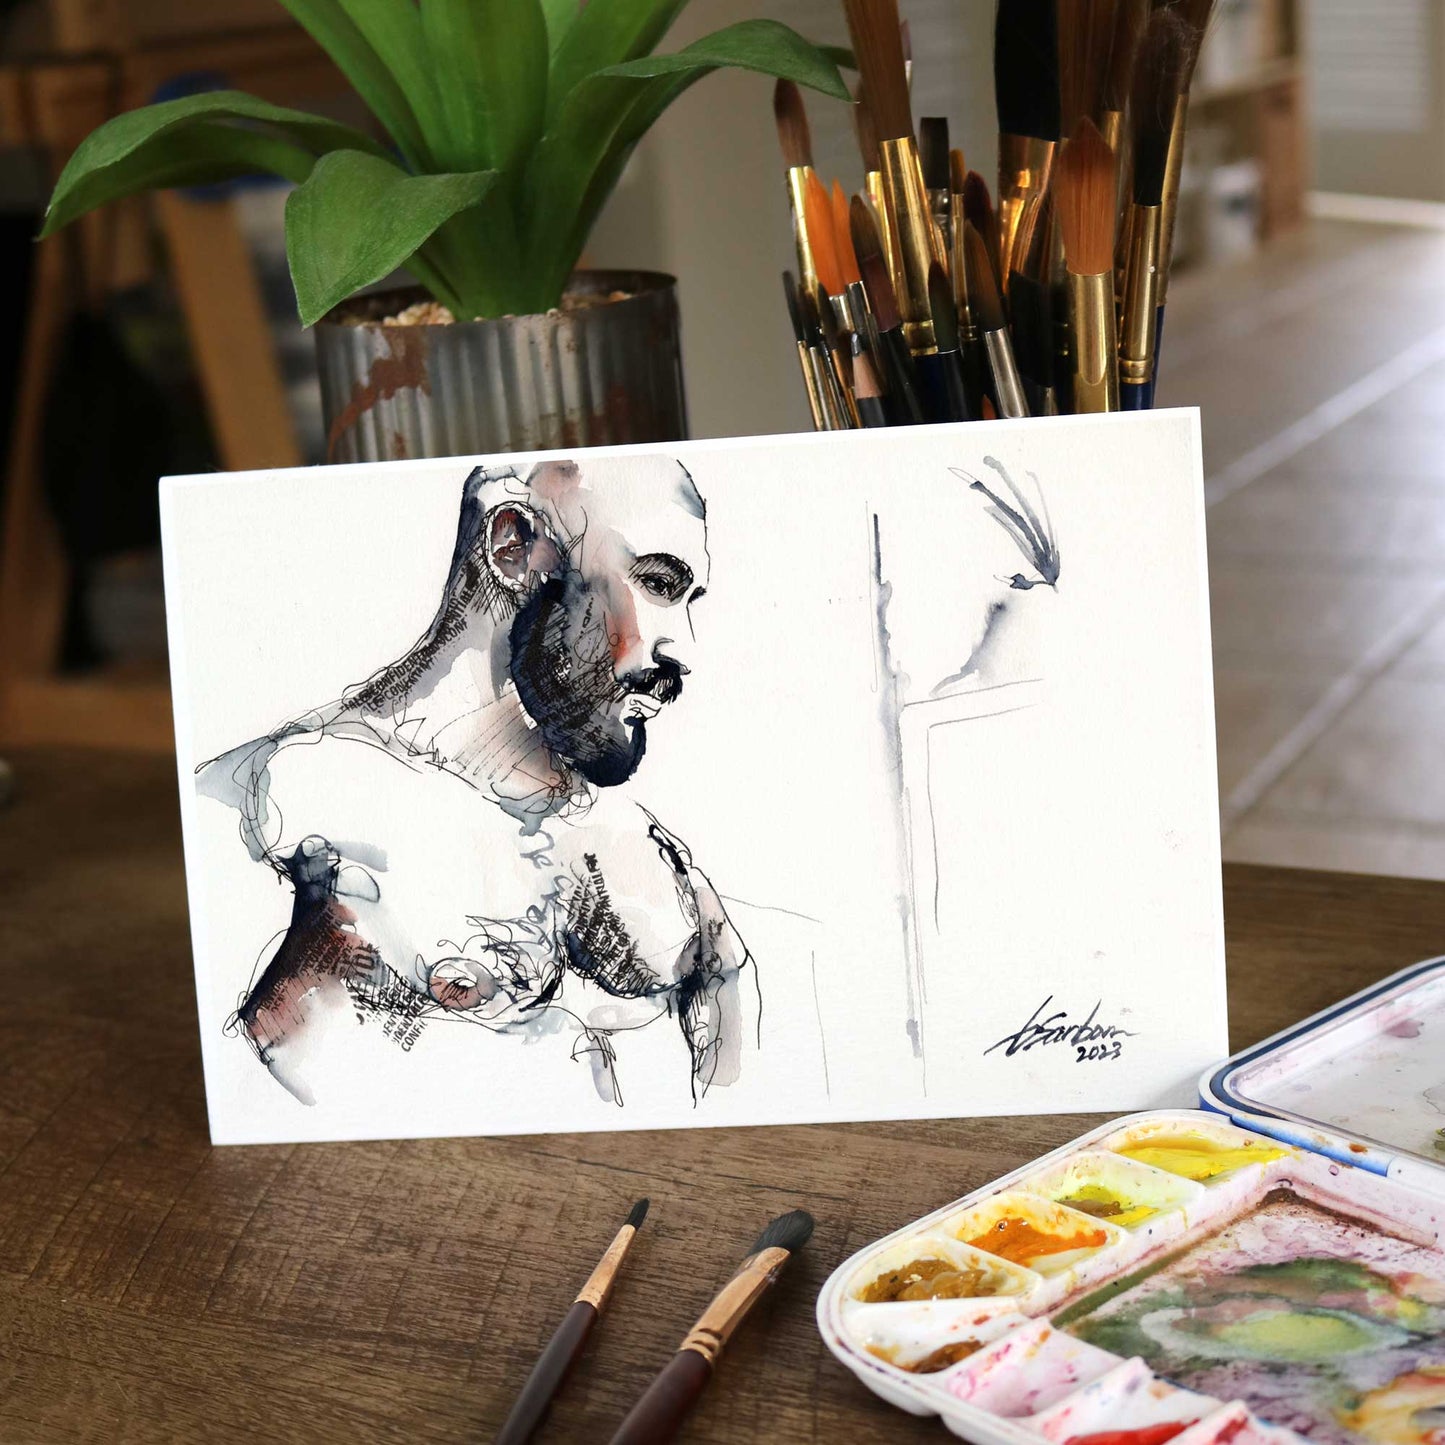 Rugged Elegance - Bearded and Muscular - 6x9" Original Watercolor and Ink Painting